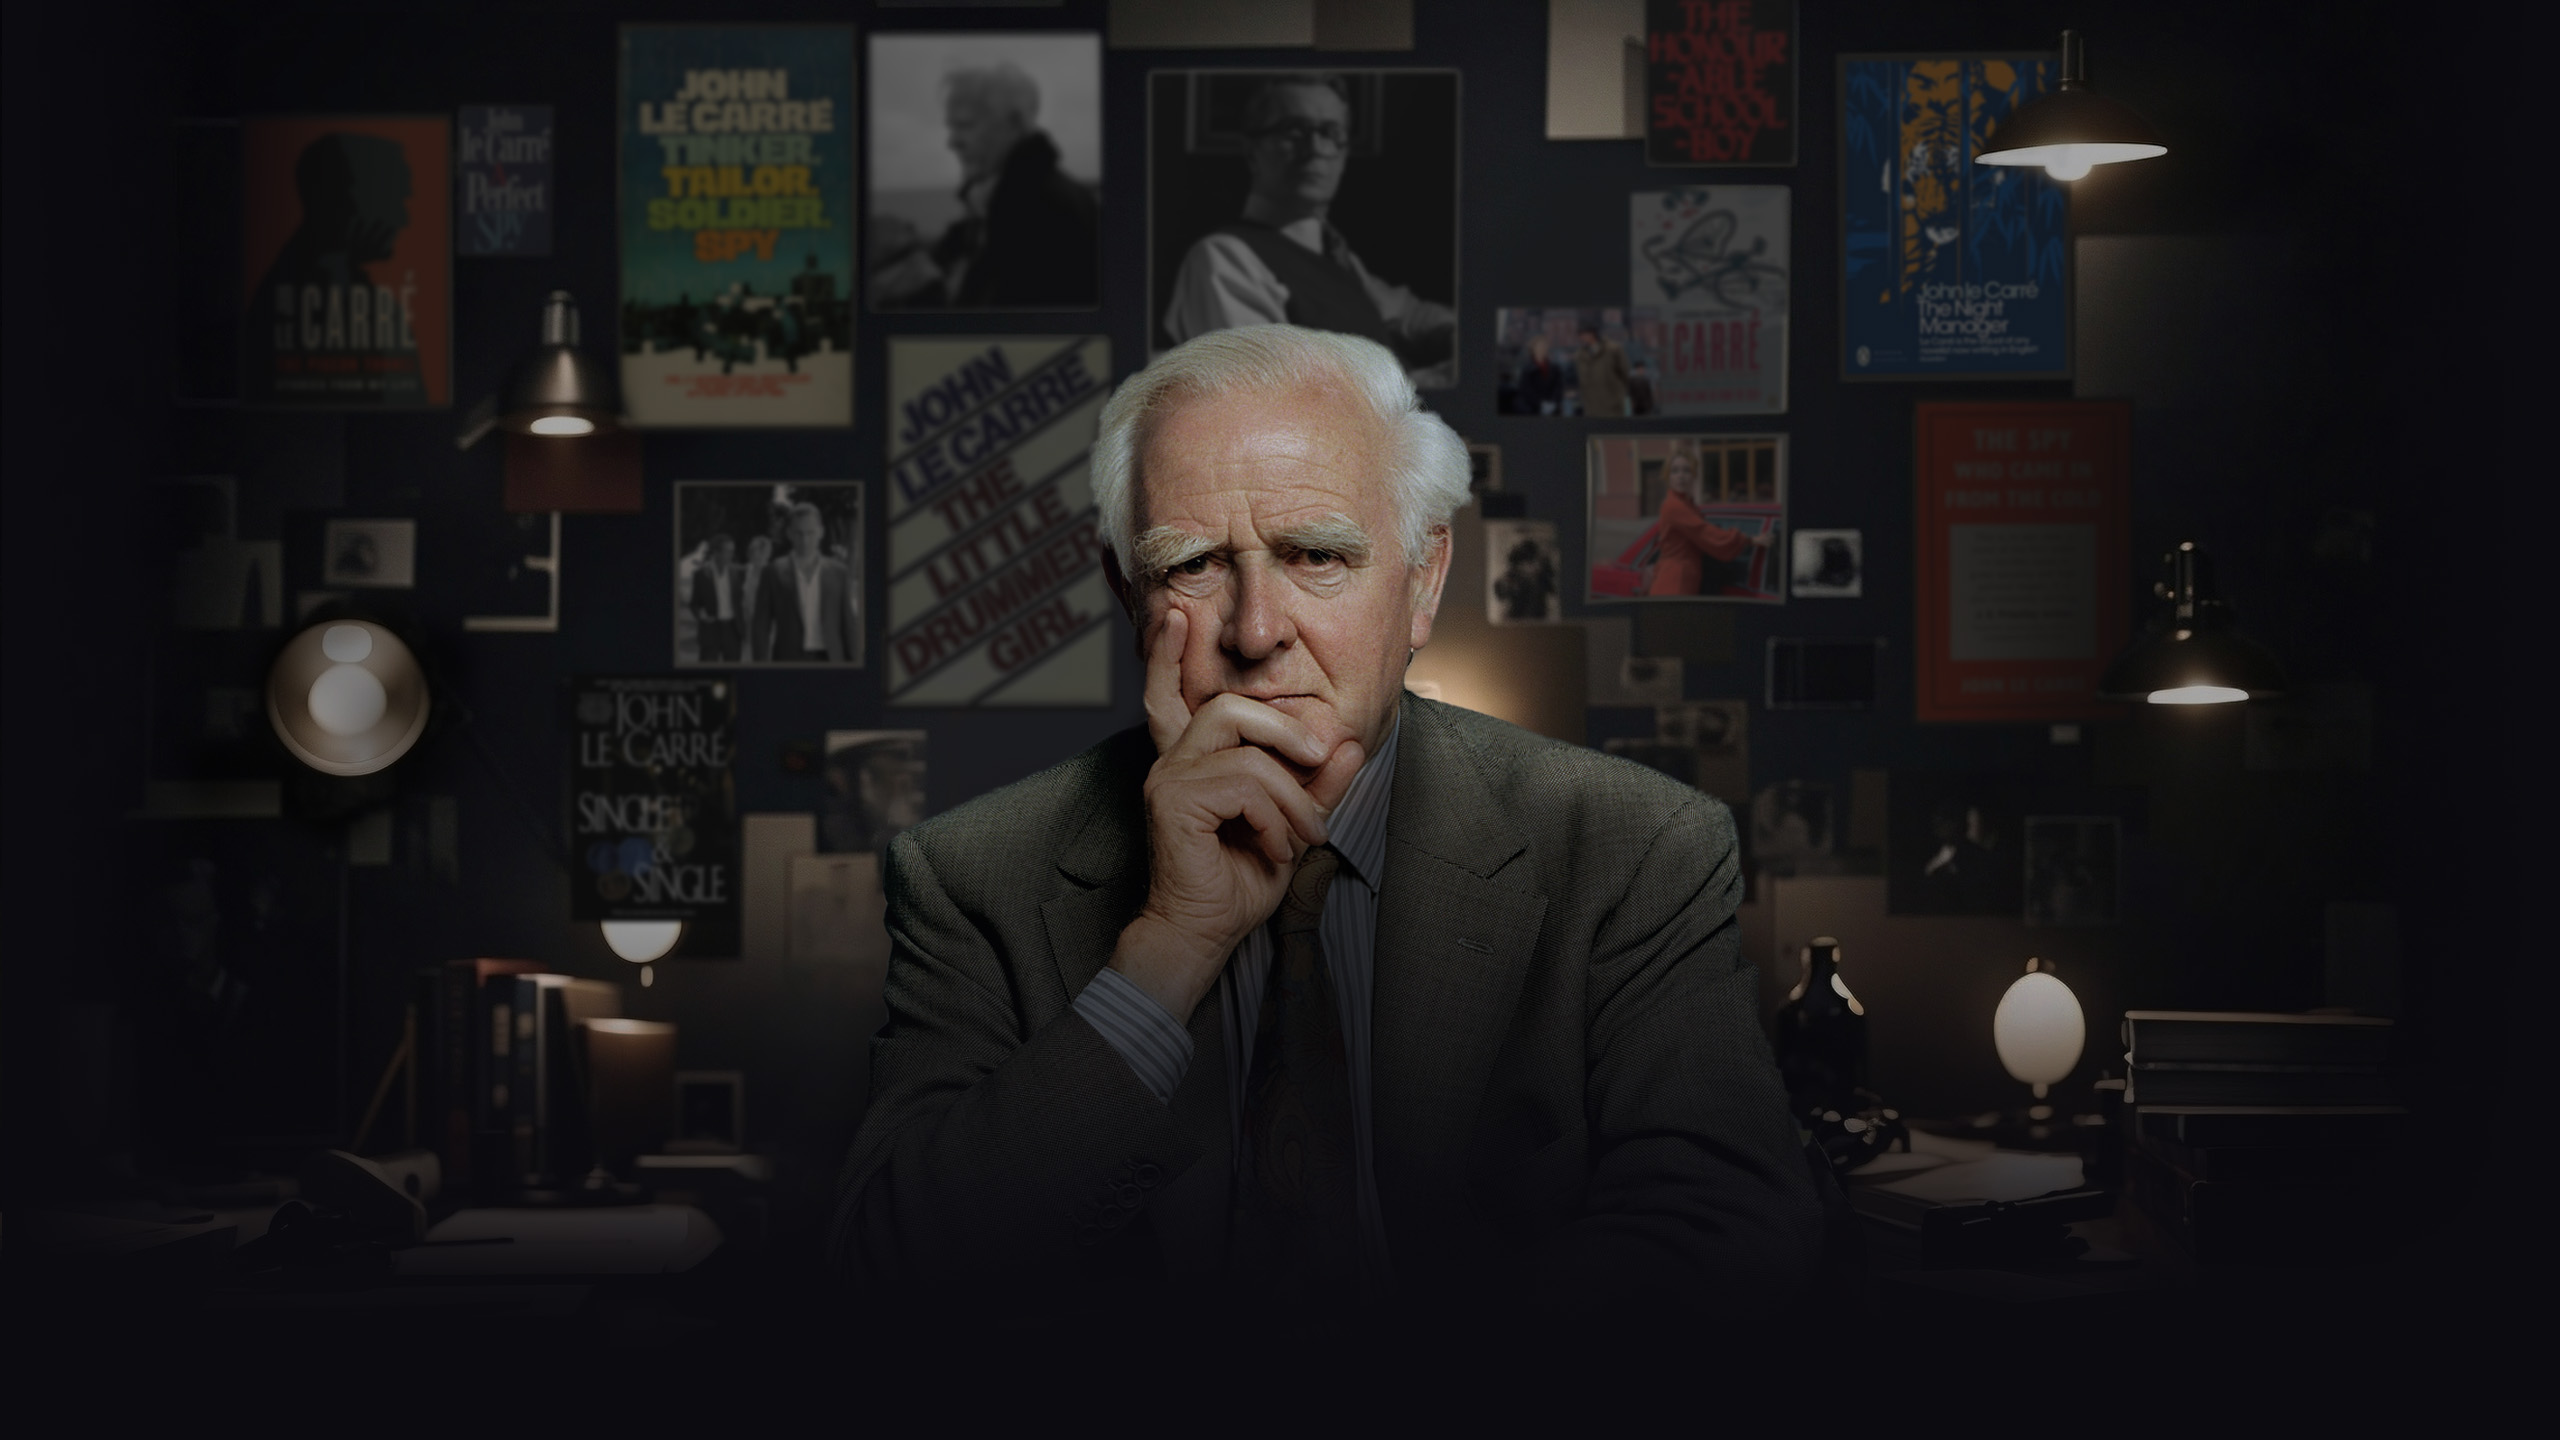 John Le Carré sitting in front of his desk with framed pictures of his books and films on the wall behind him.